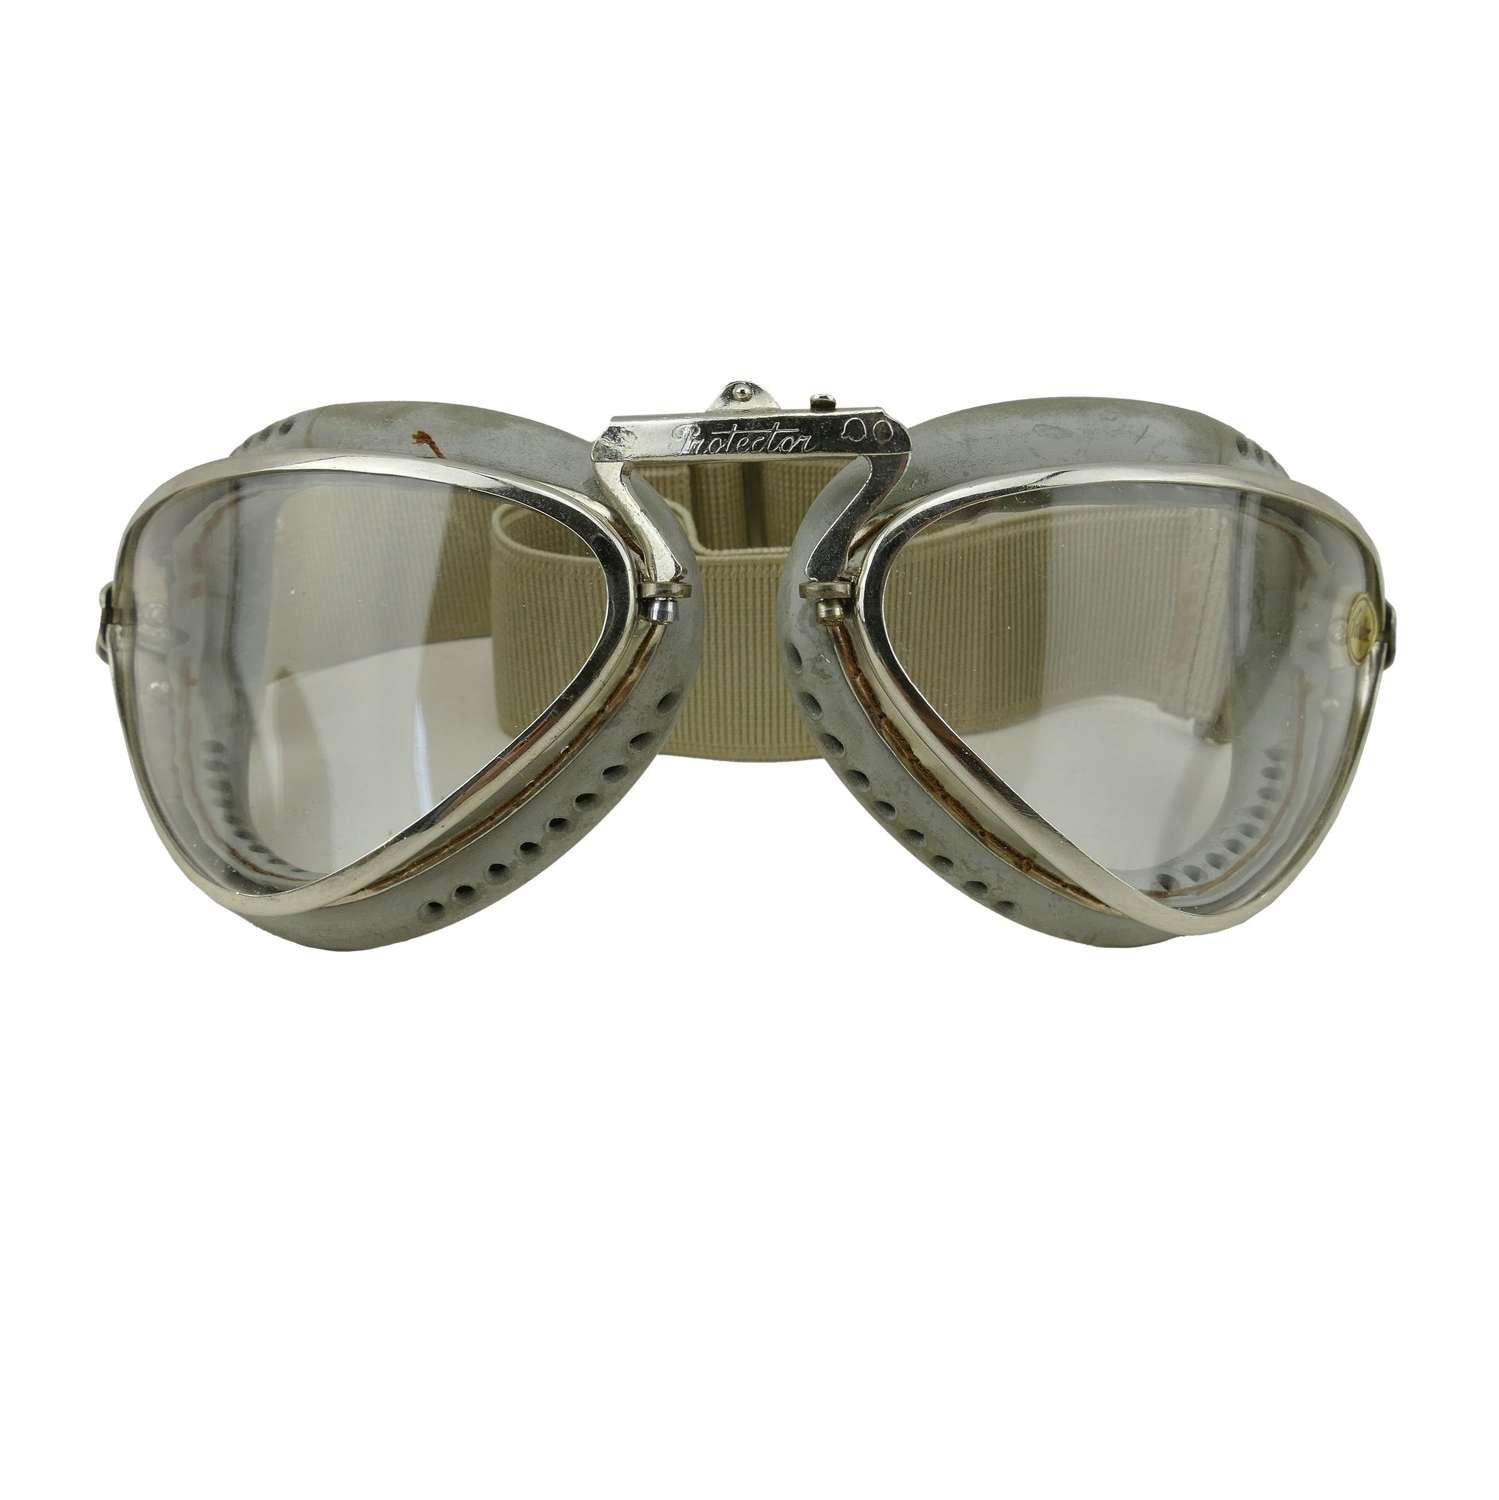 Italian 'Protector' flying goggles, cased